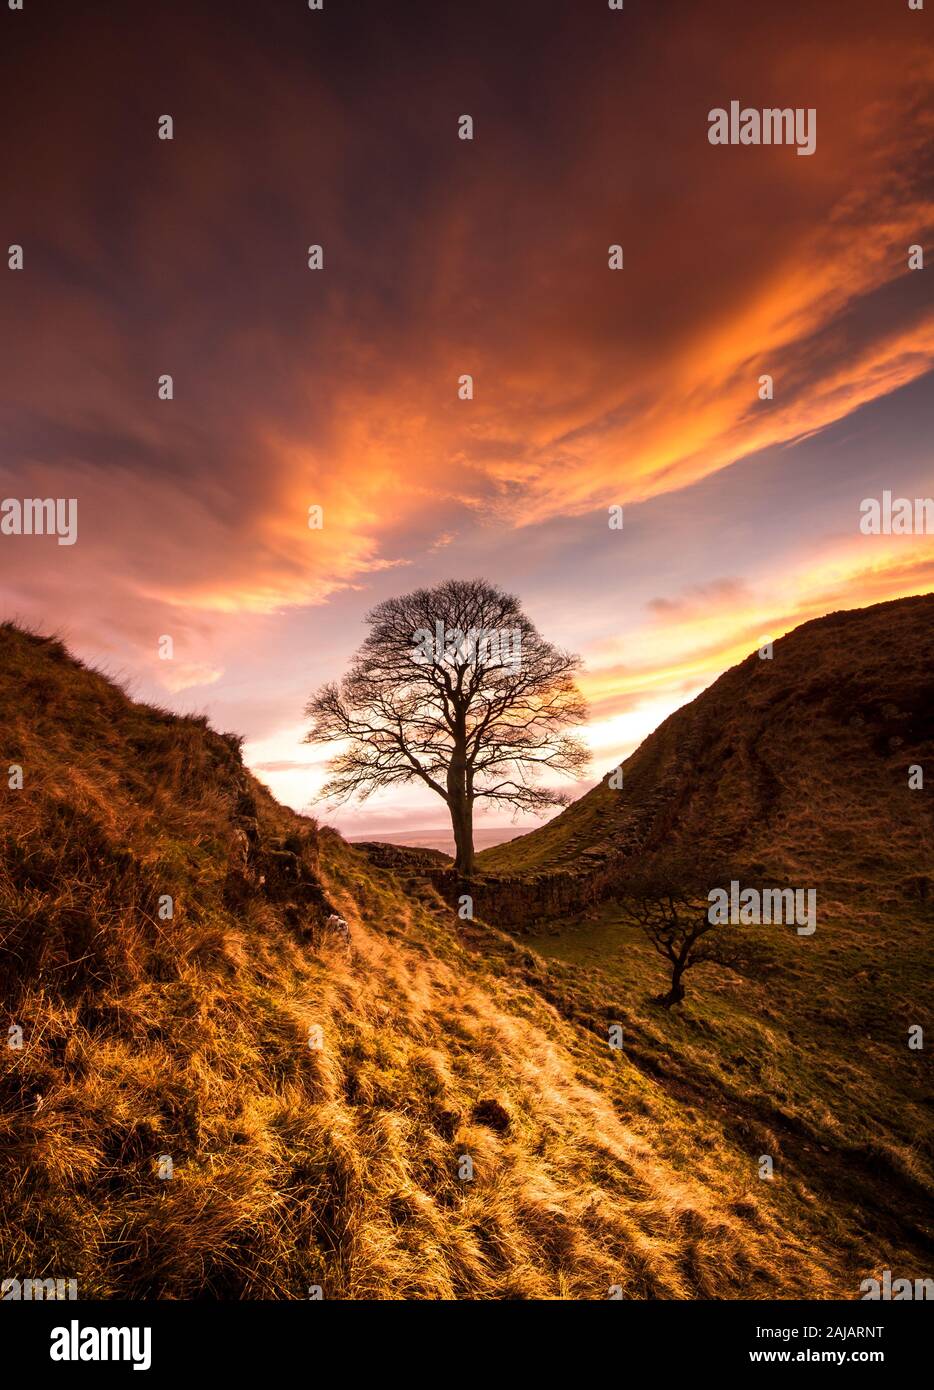 Sycamore Gap on Hadrian's Wall in Northumberland, the edge of the Roman Empire, under a bright orange sunset sky - where Robin Hood was filmed Stock Photo